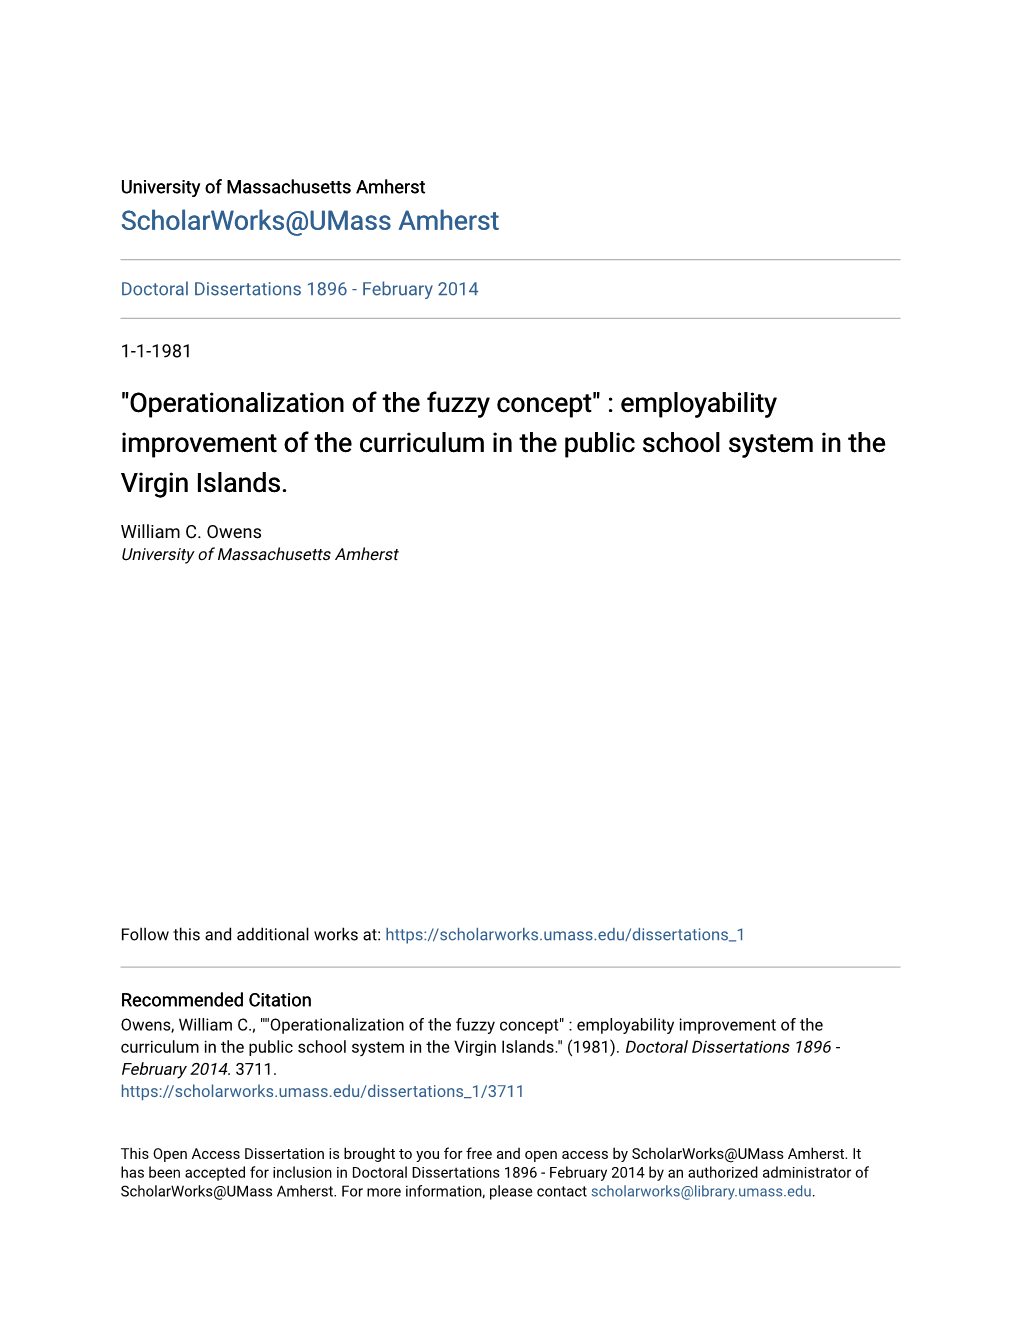 Operationalization of the Fuzzy Concept" : Employability Improvement of the Curriculum in the Public School System in the Virgin Islands